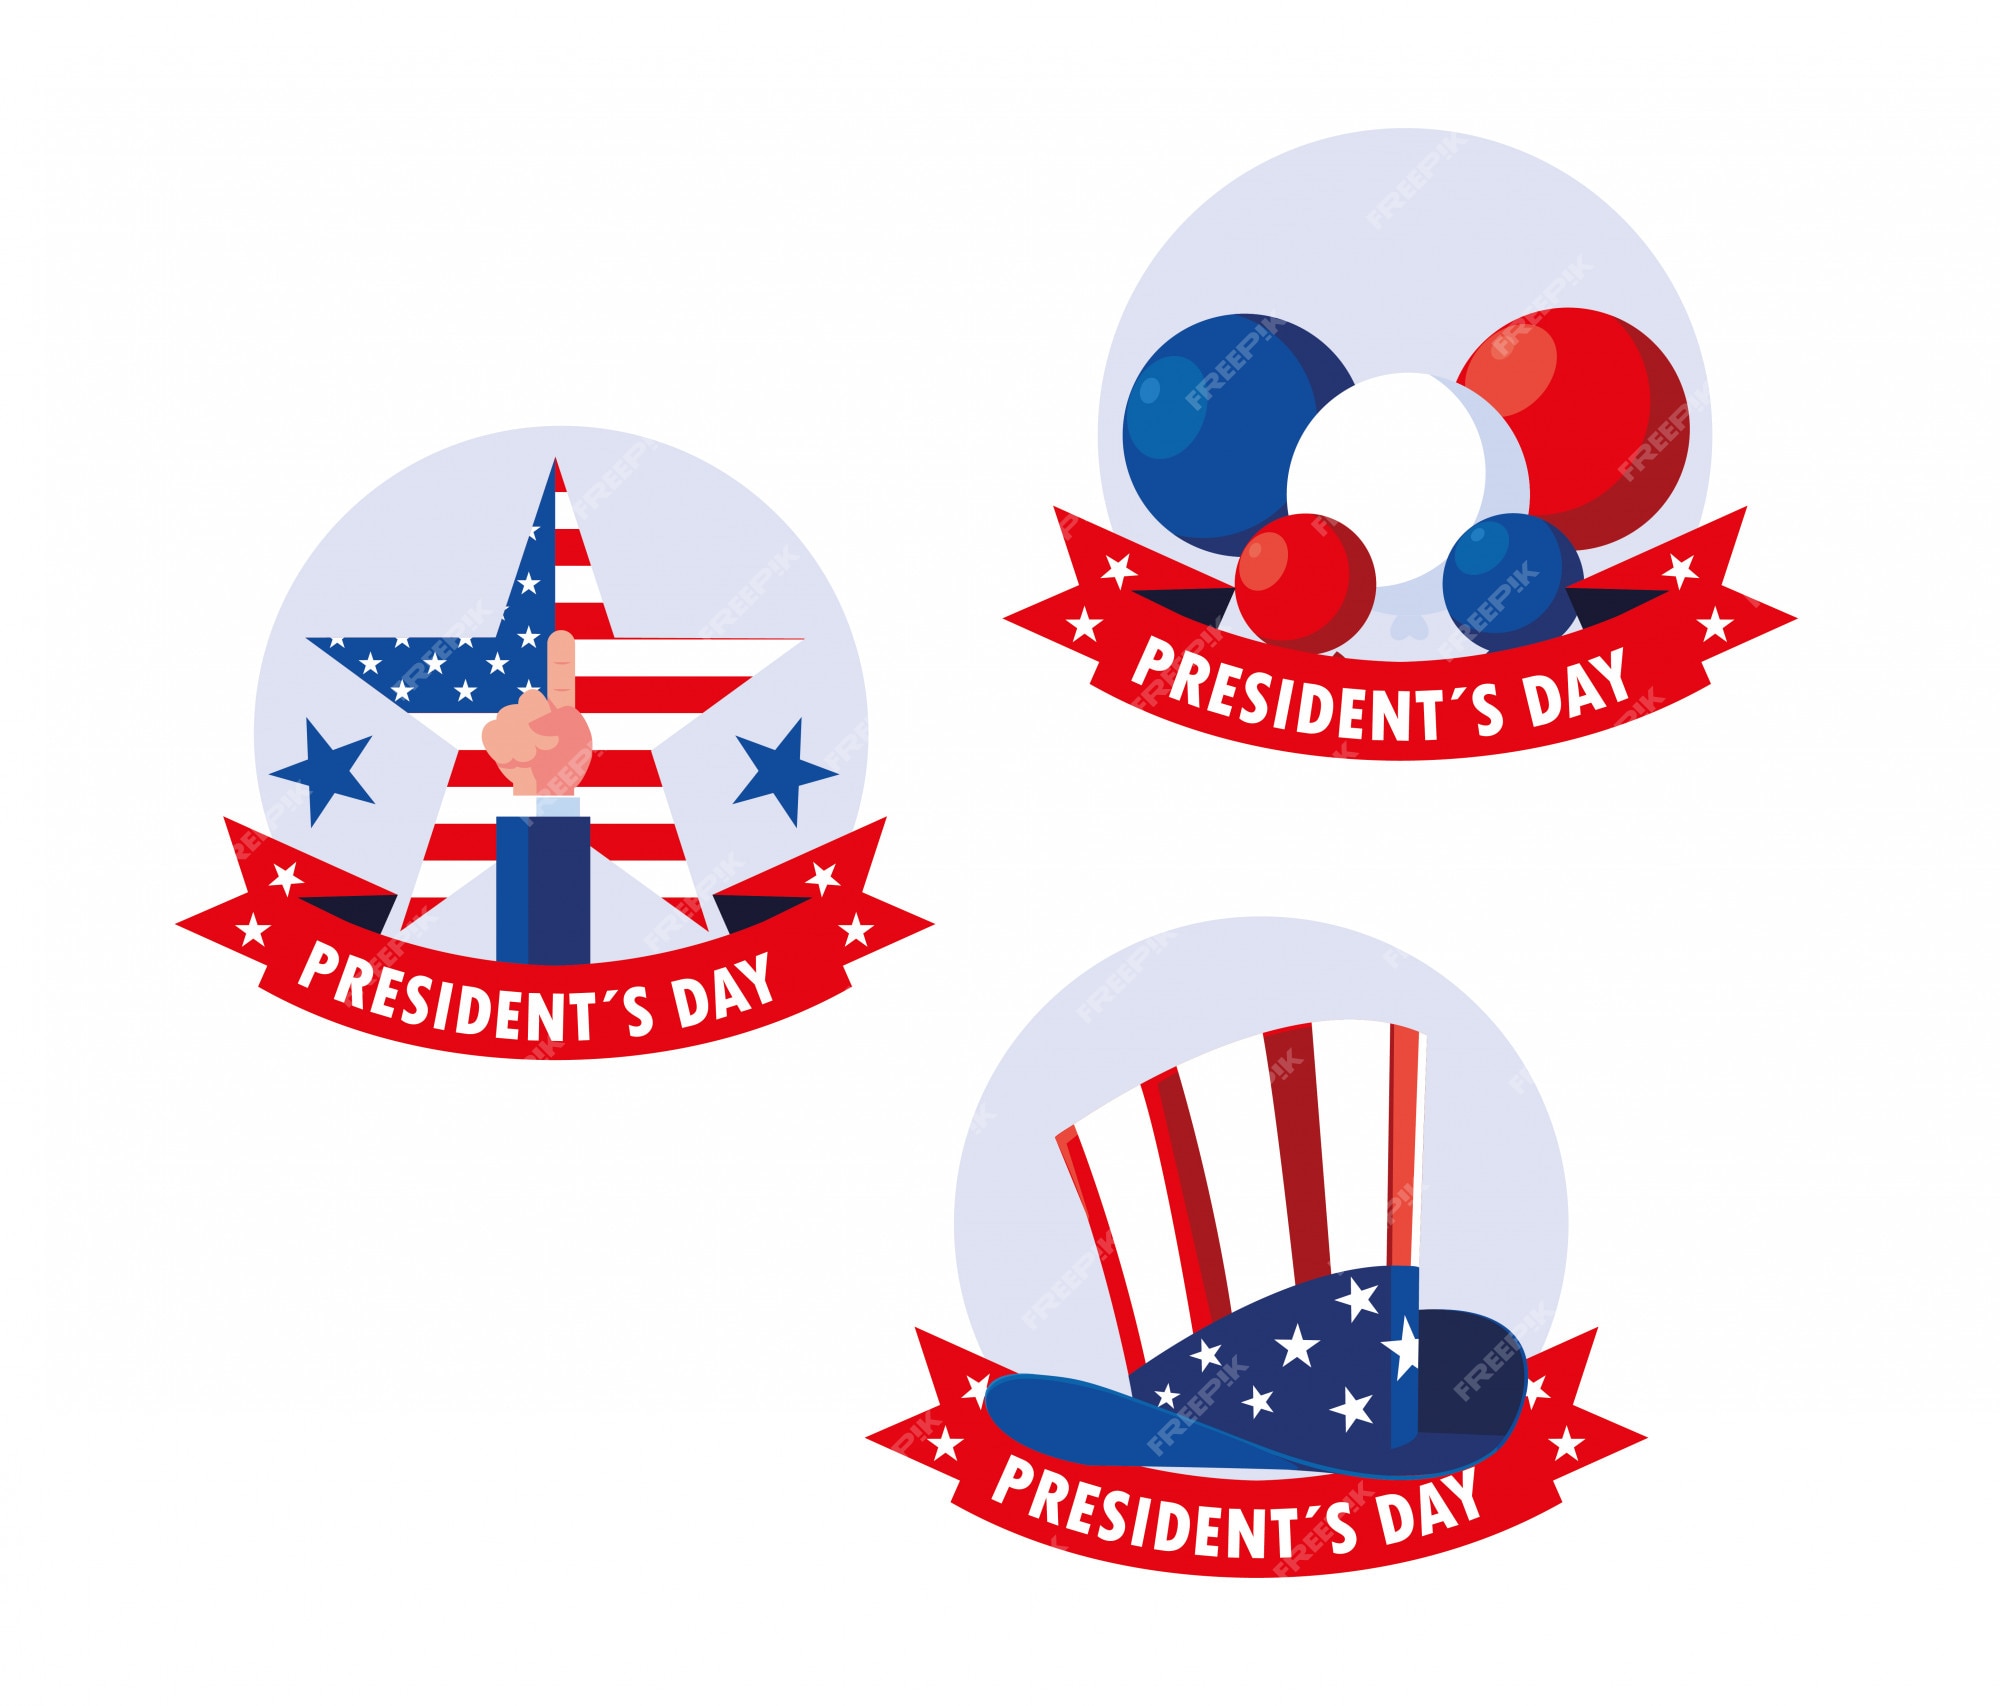 premium-vector-set-of-president-day-stickers-on-a-white-background